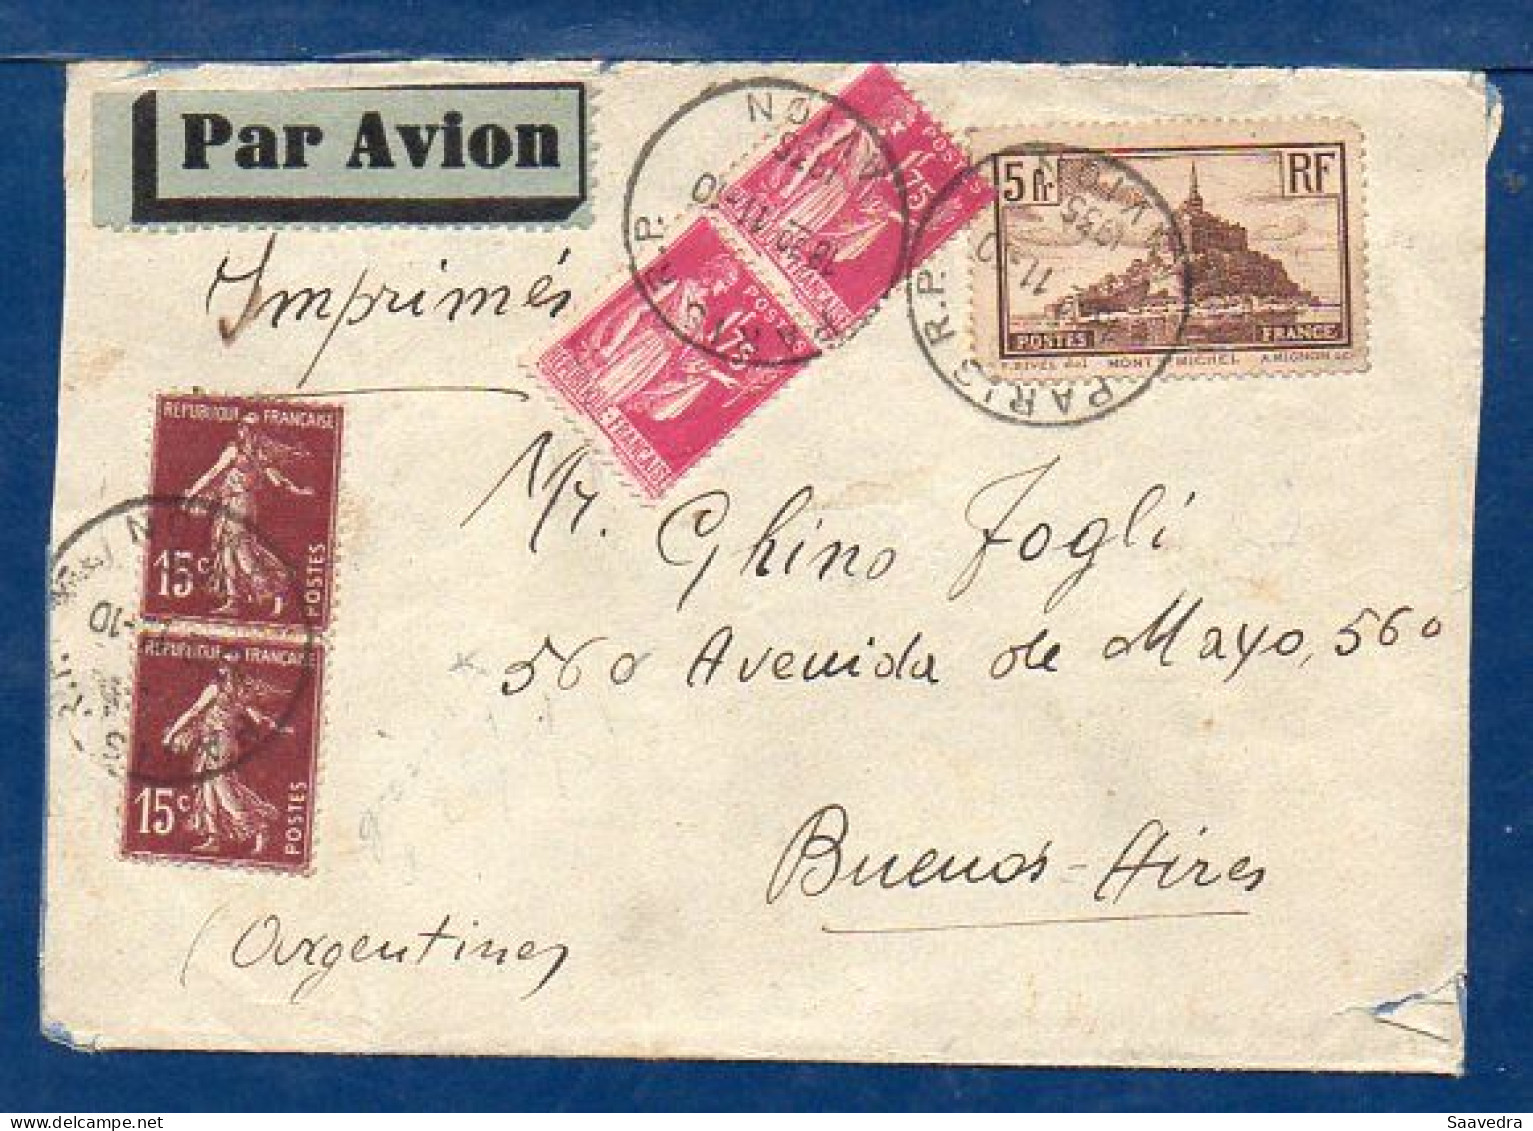 France To Argentina, 1935, Via Air France  (006) - Luftpost